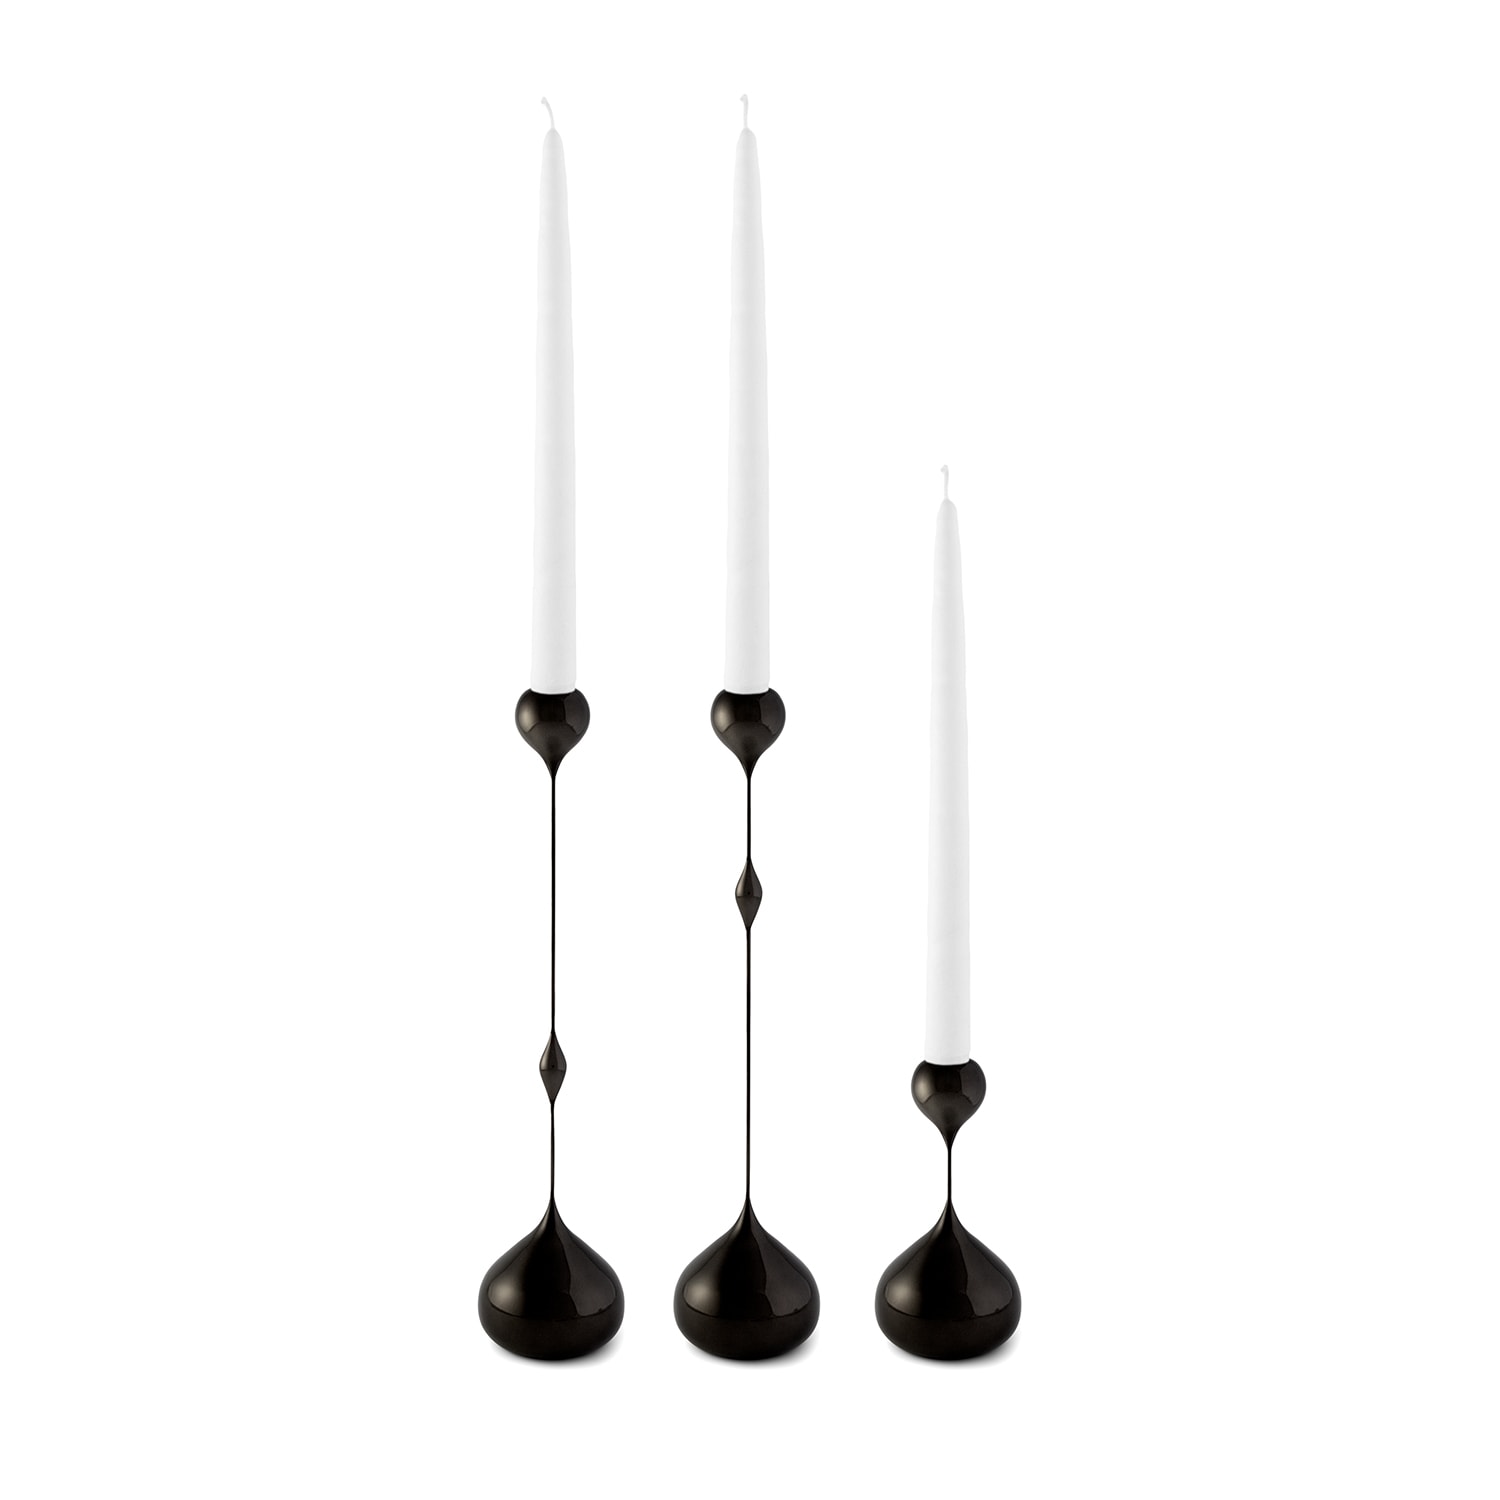 Tender High, Low & Small Black Candles Square